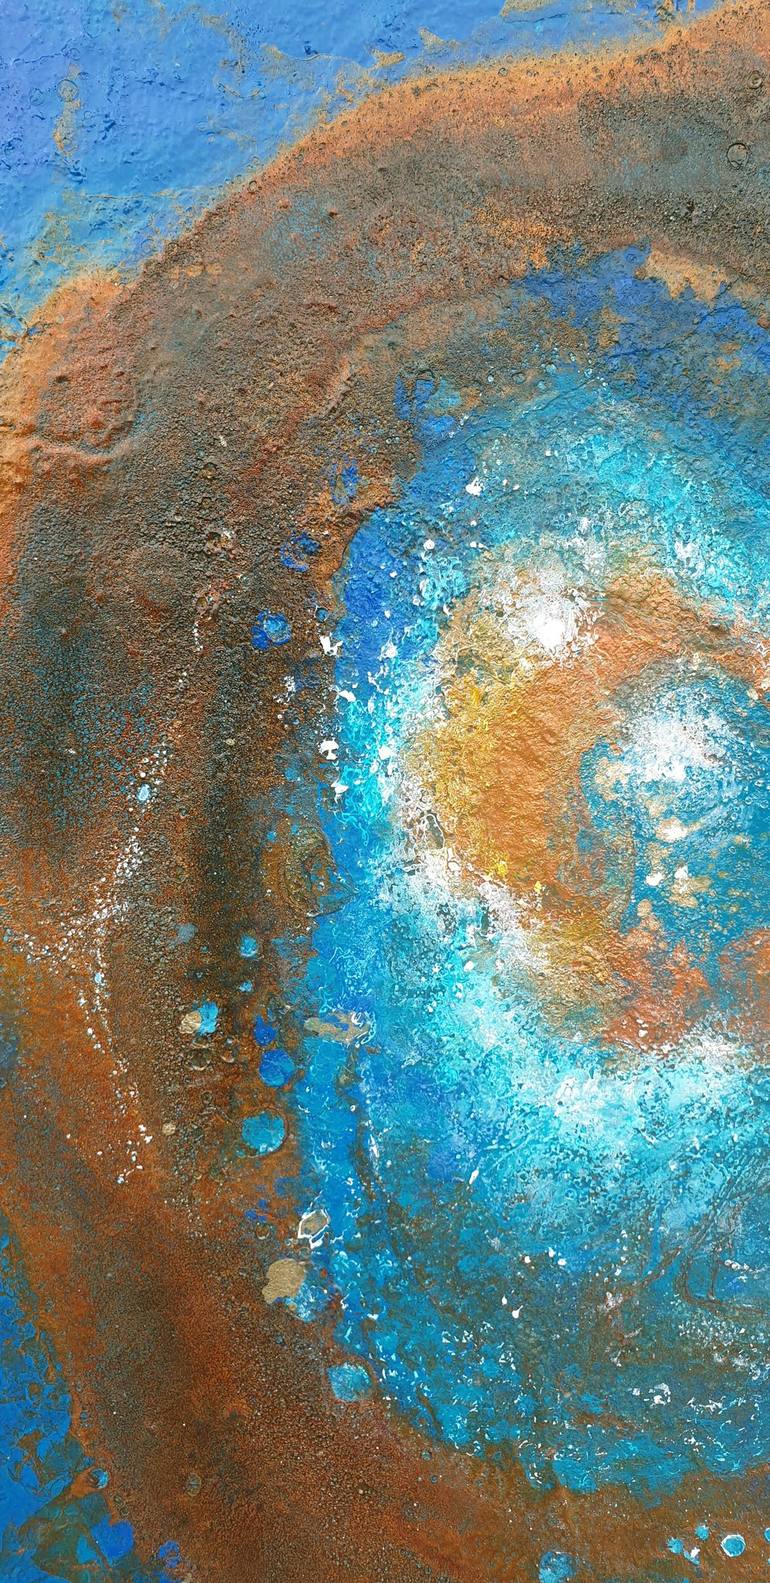 Original Outer Space Painting by Brigitte Ackland